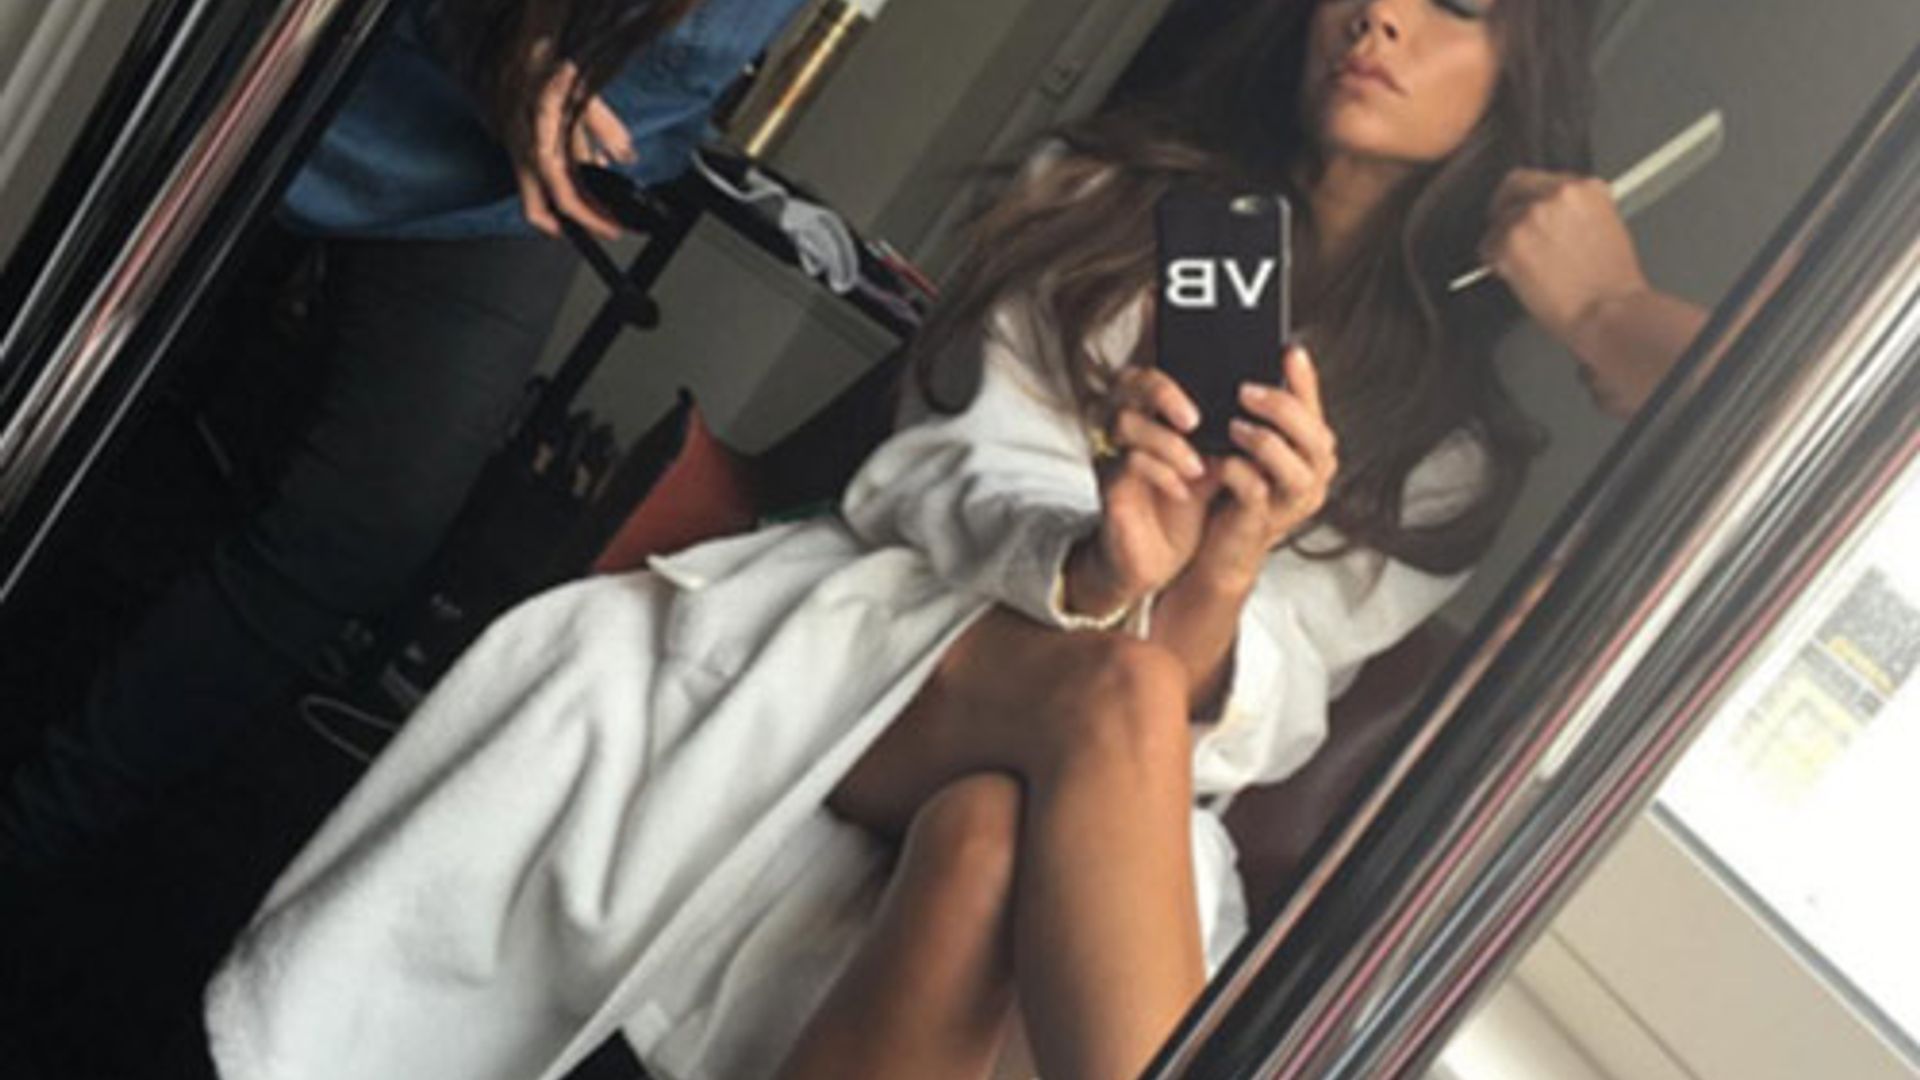 Victoria Beckham is glam even in a robe and slippers!